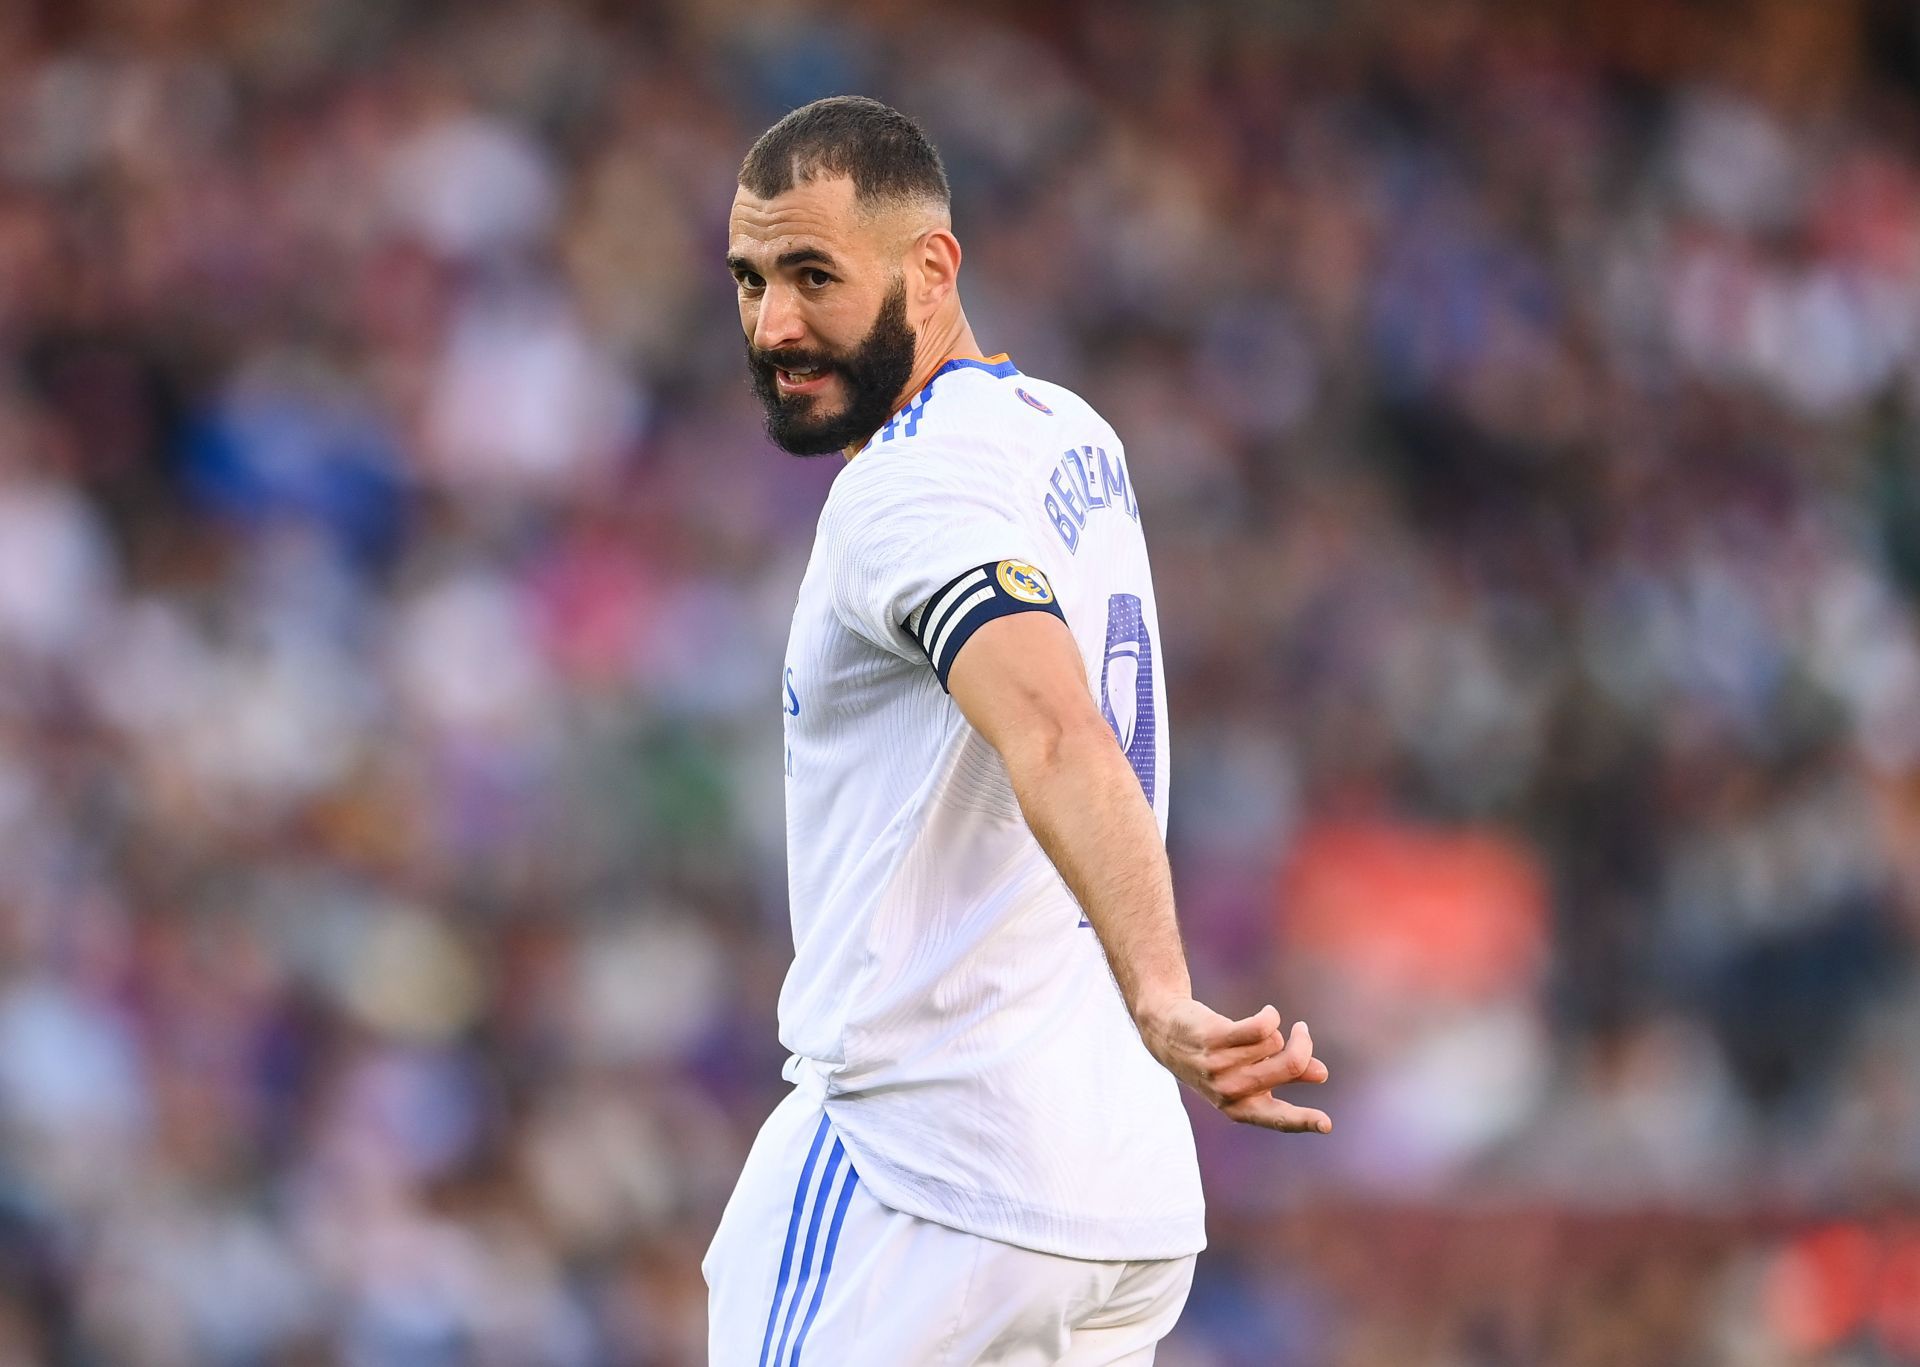 Karim Benzema&#039;s remarkable year could help him win the Ballon d&#039;Or award